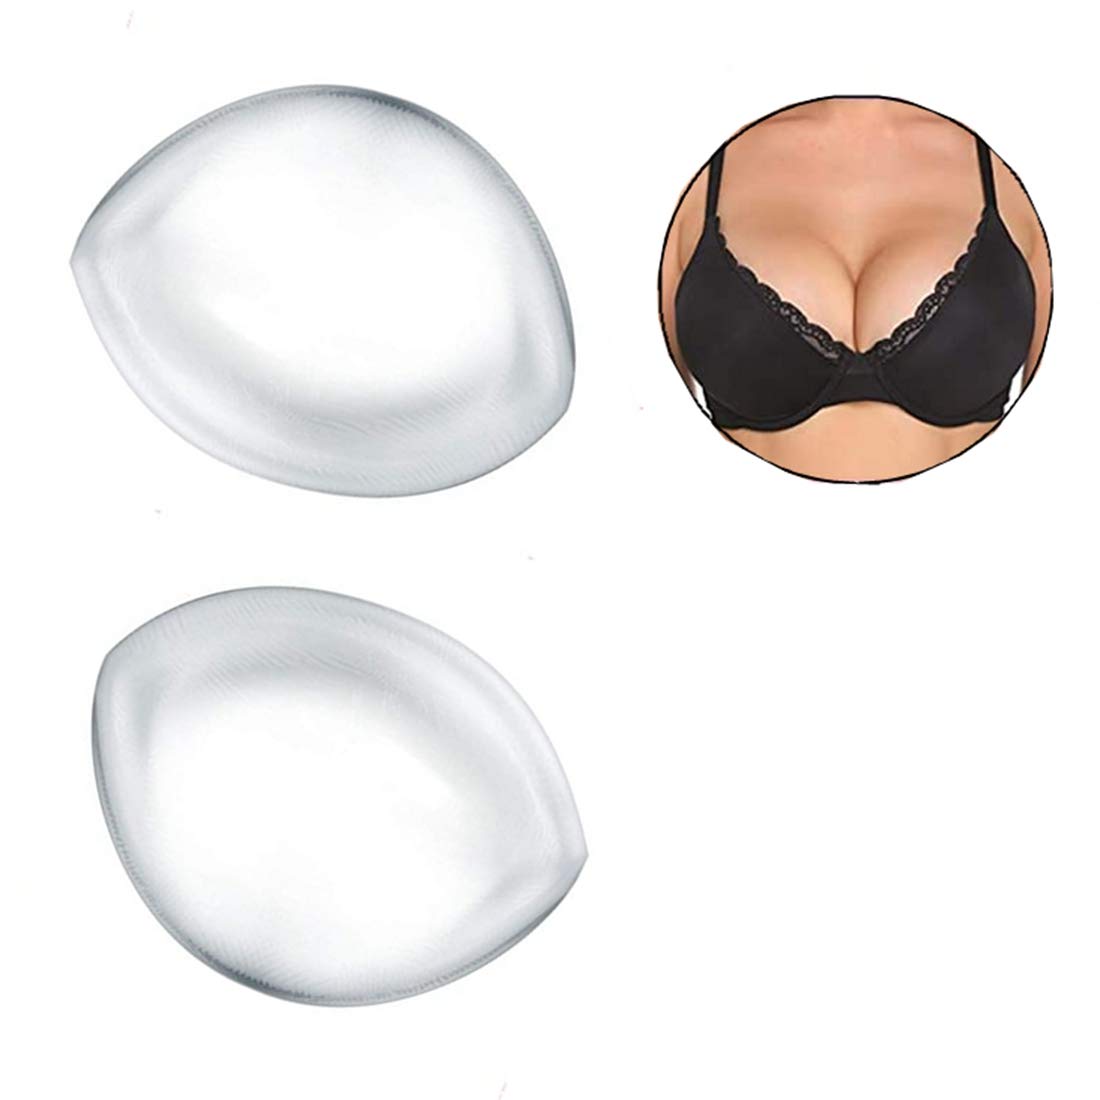 Silicone Bra Inserts, 2 Cup Size Up Gel Pads Breast Enhancer